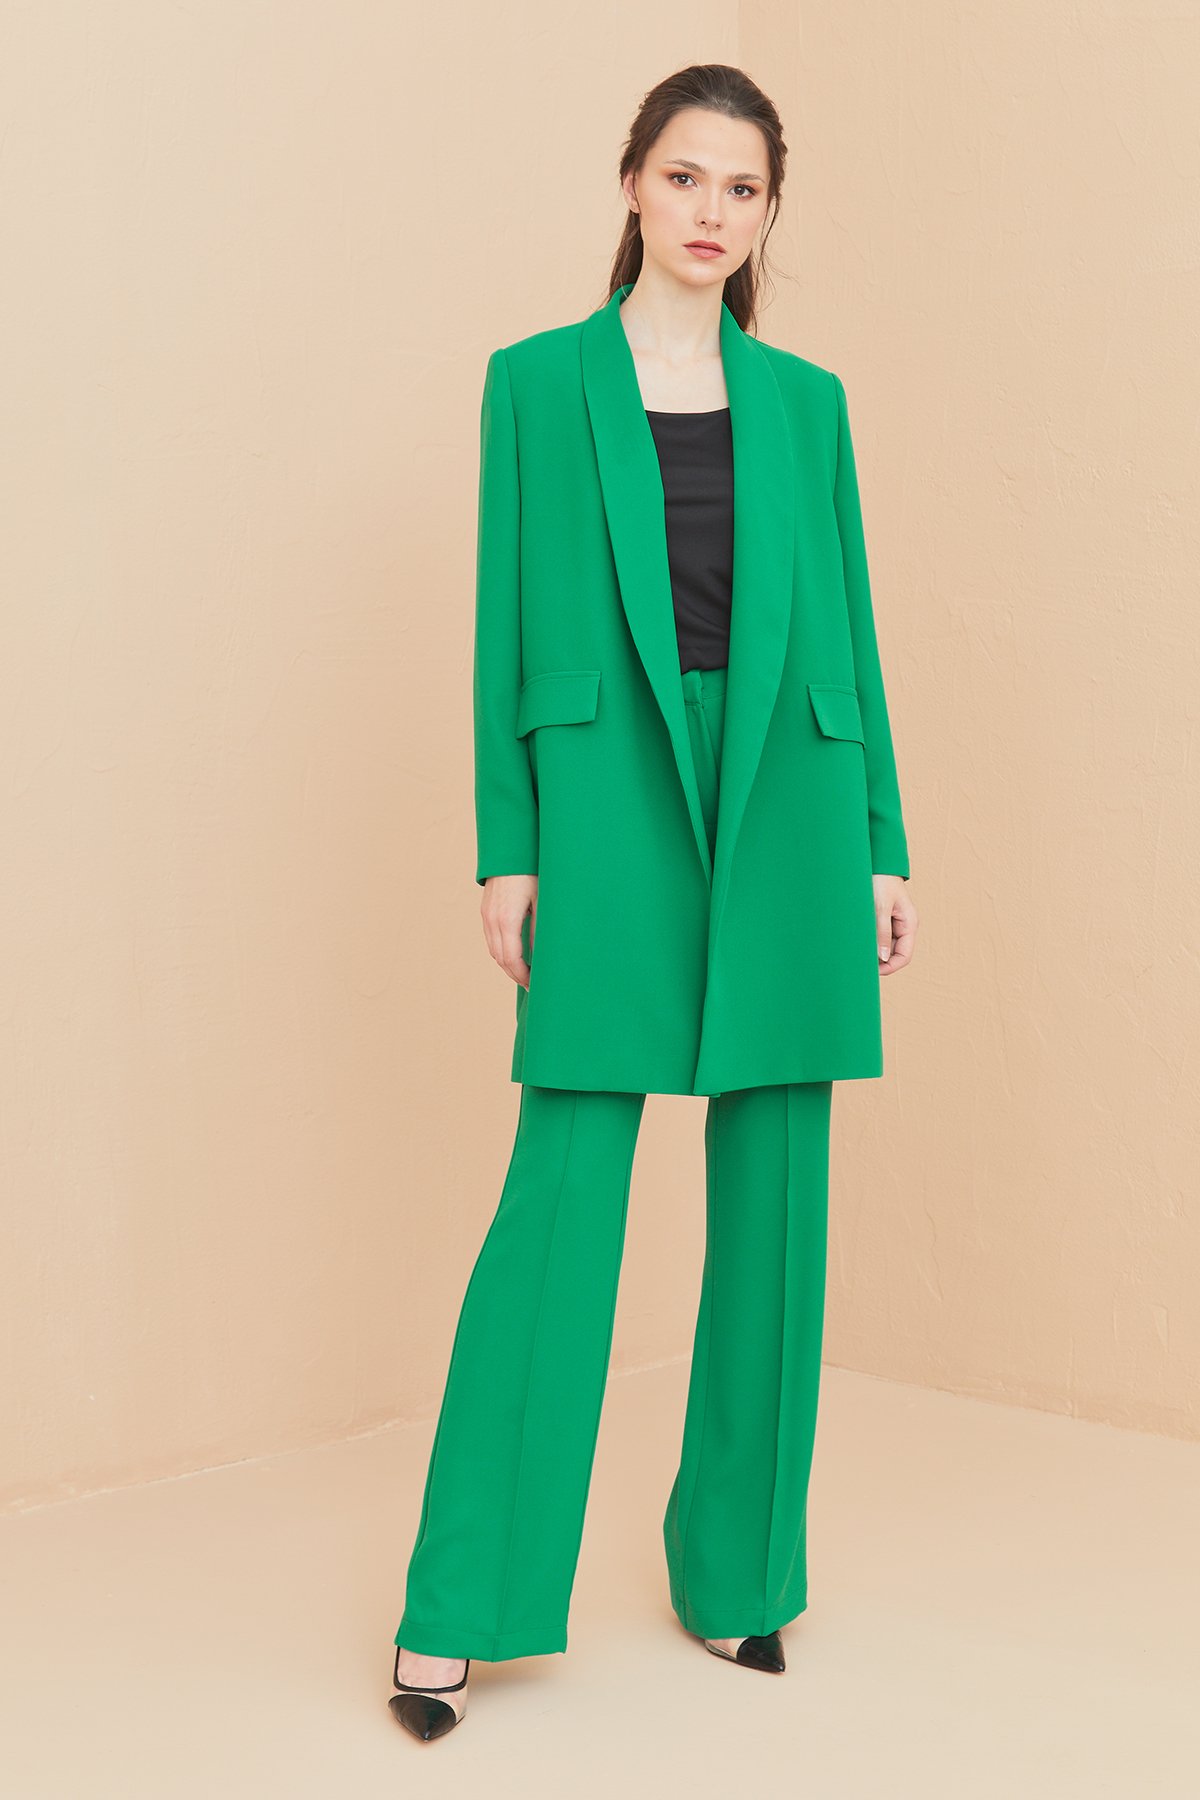 Shawl Collar With Belt Suit Green